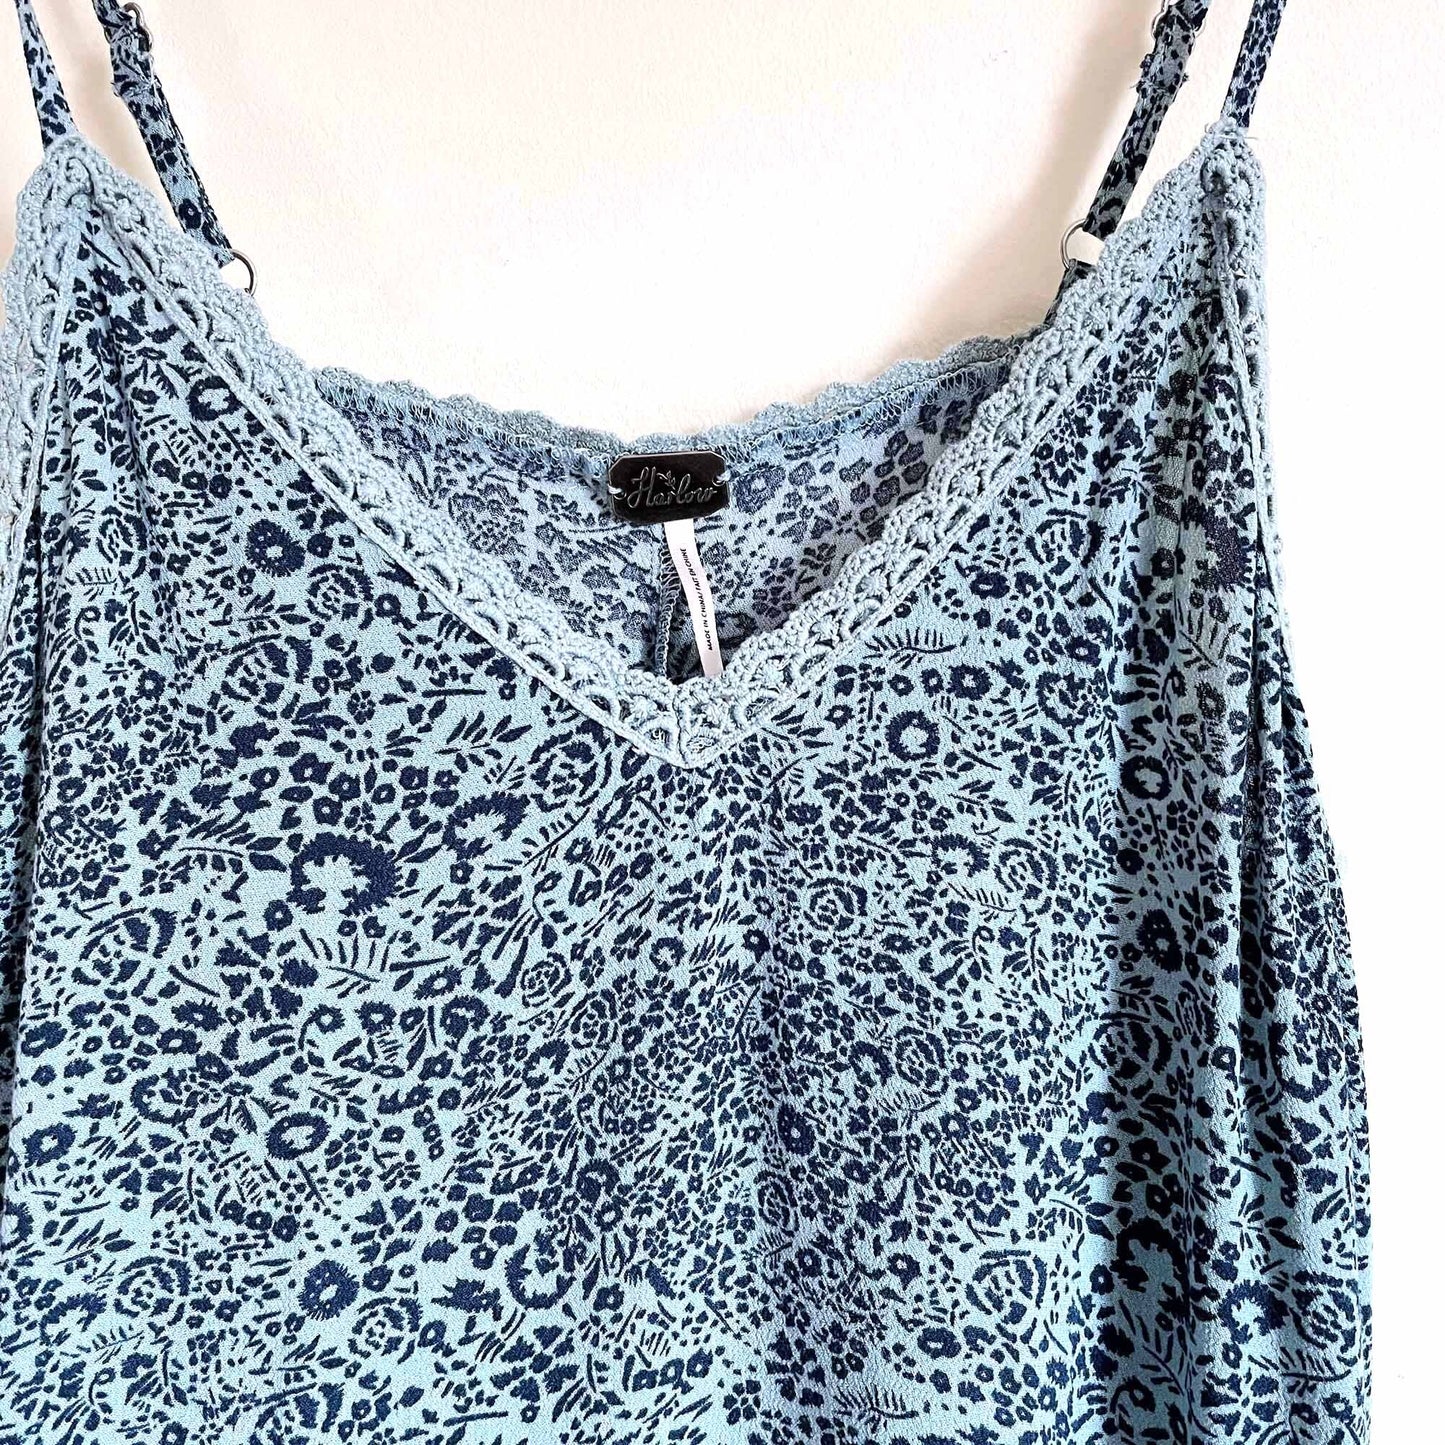 Harlow floral slip dress with crochet lace trim - size Small